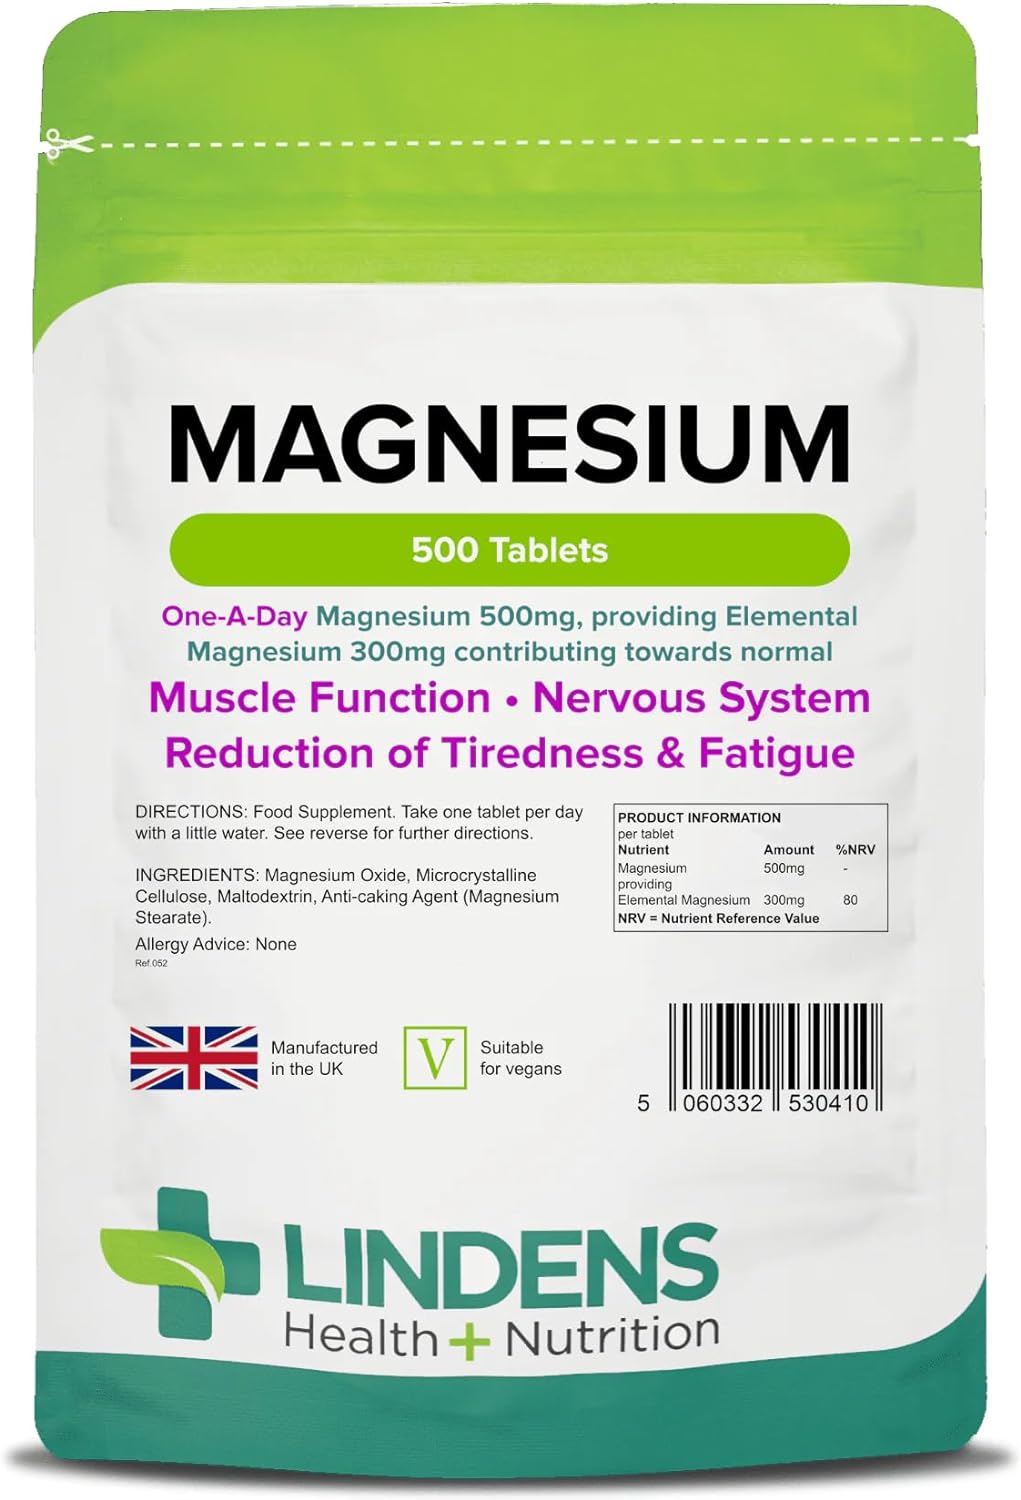 Lindens Magnesium Tablets 500mg – 500 Tablets – Reduces Tiredness and 0.38 Grams